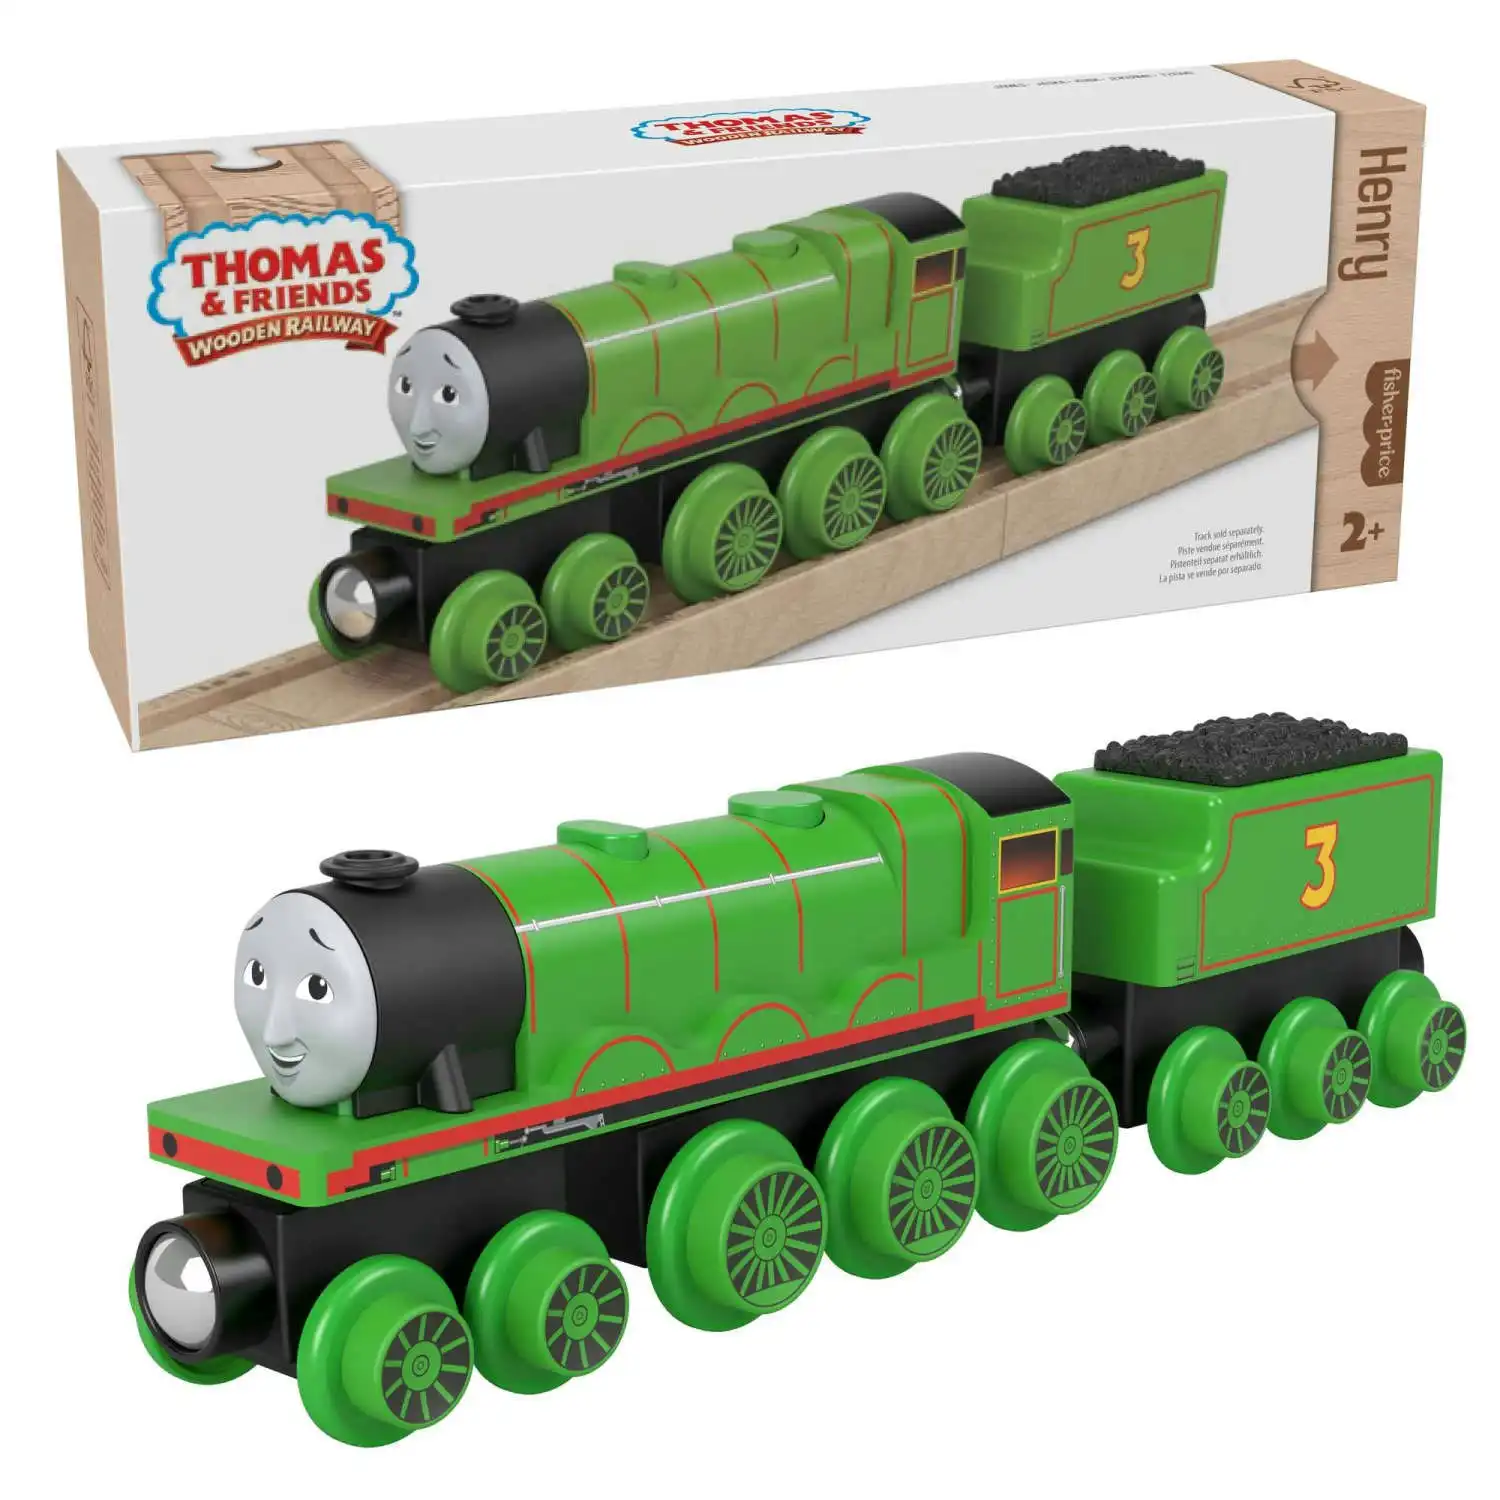 Thomas & Friends Wooden Railway Henry Engine And Coal Car